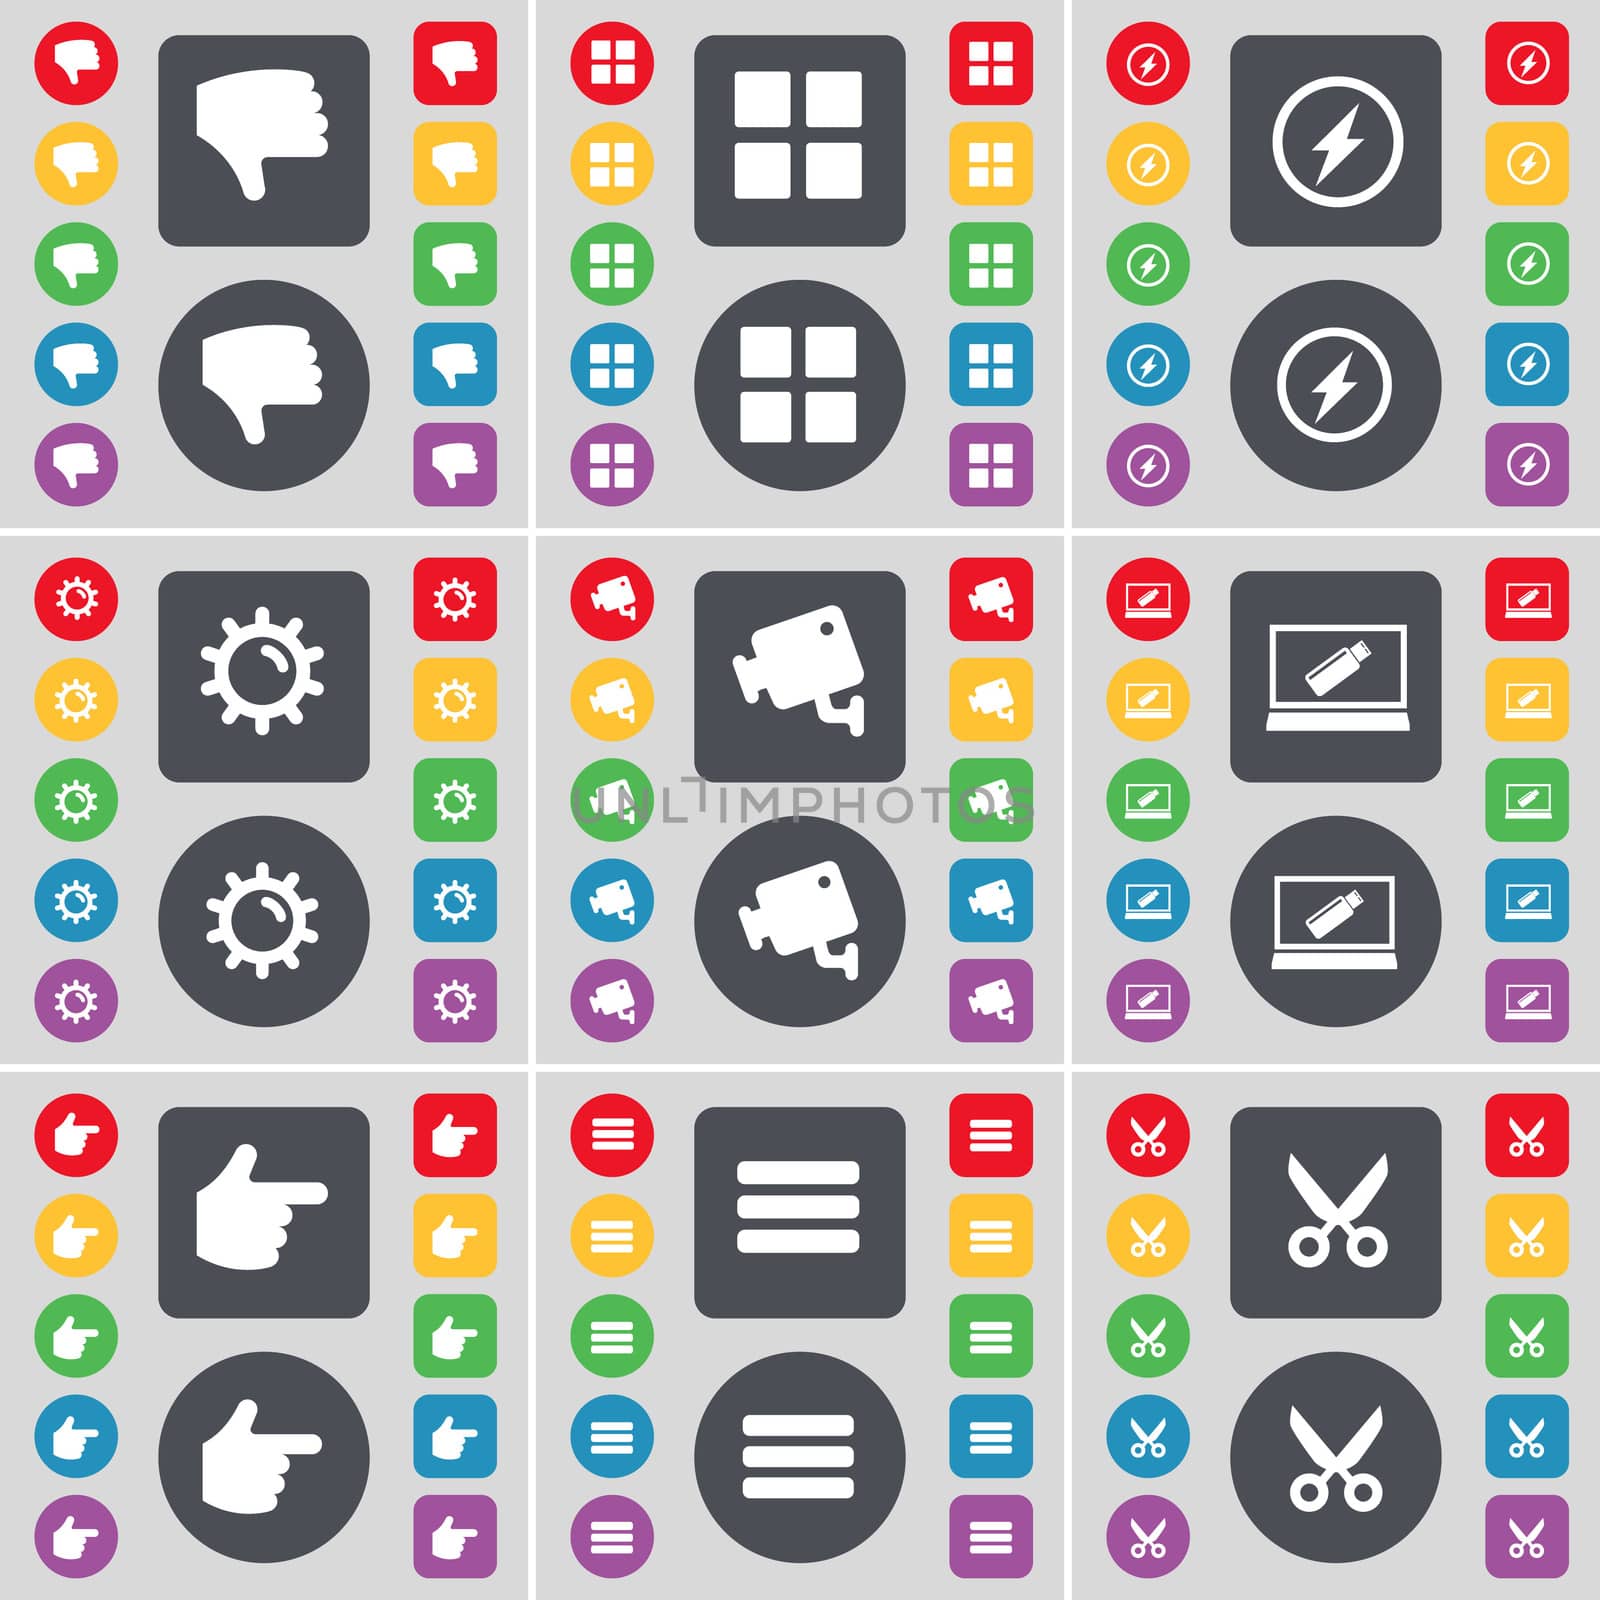 Dislike, Apps, Flash, Gear, CCTV, Laptop, Hand, Apps, Scissors icon symbol. A large set of flat, colored buttons for your design. illustration